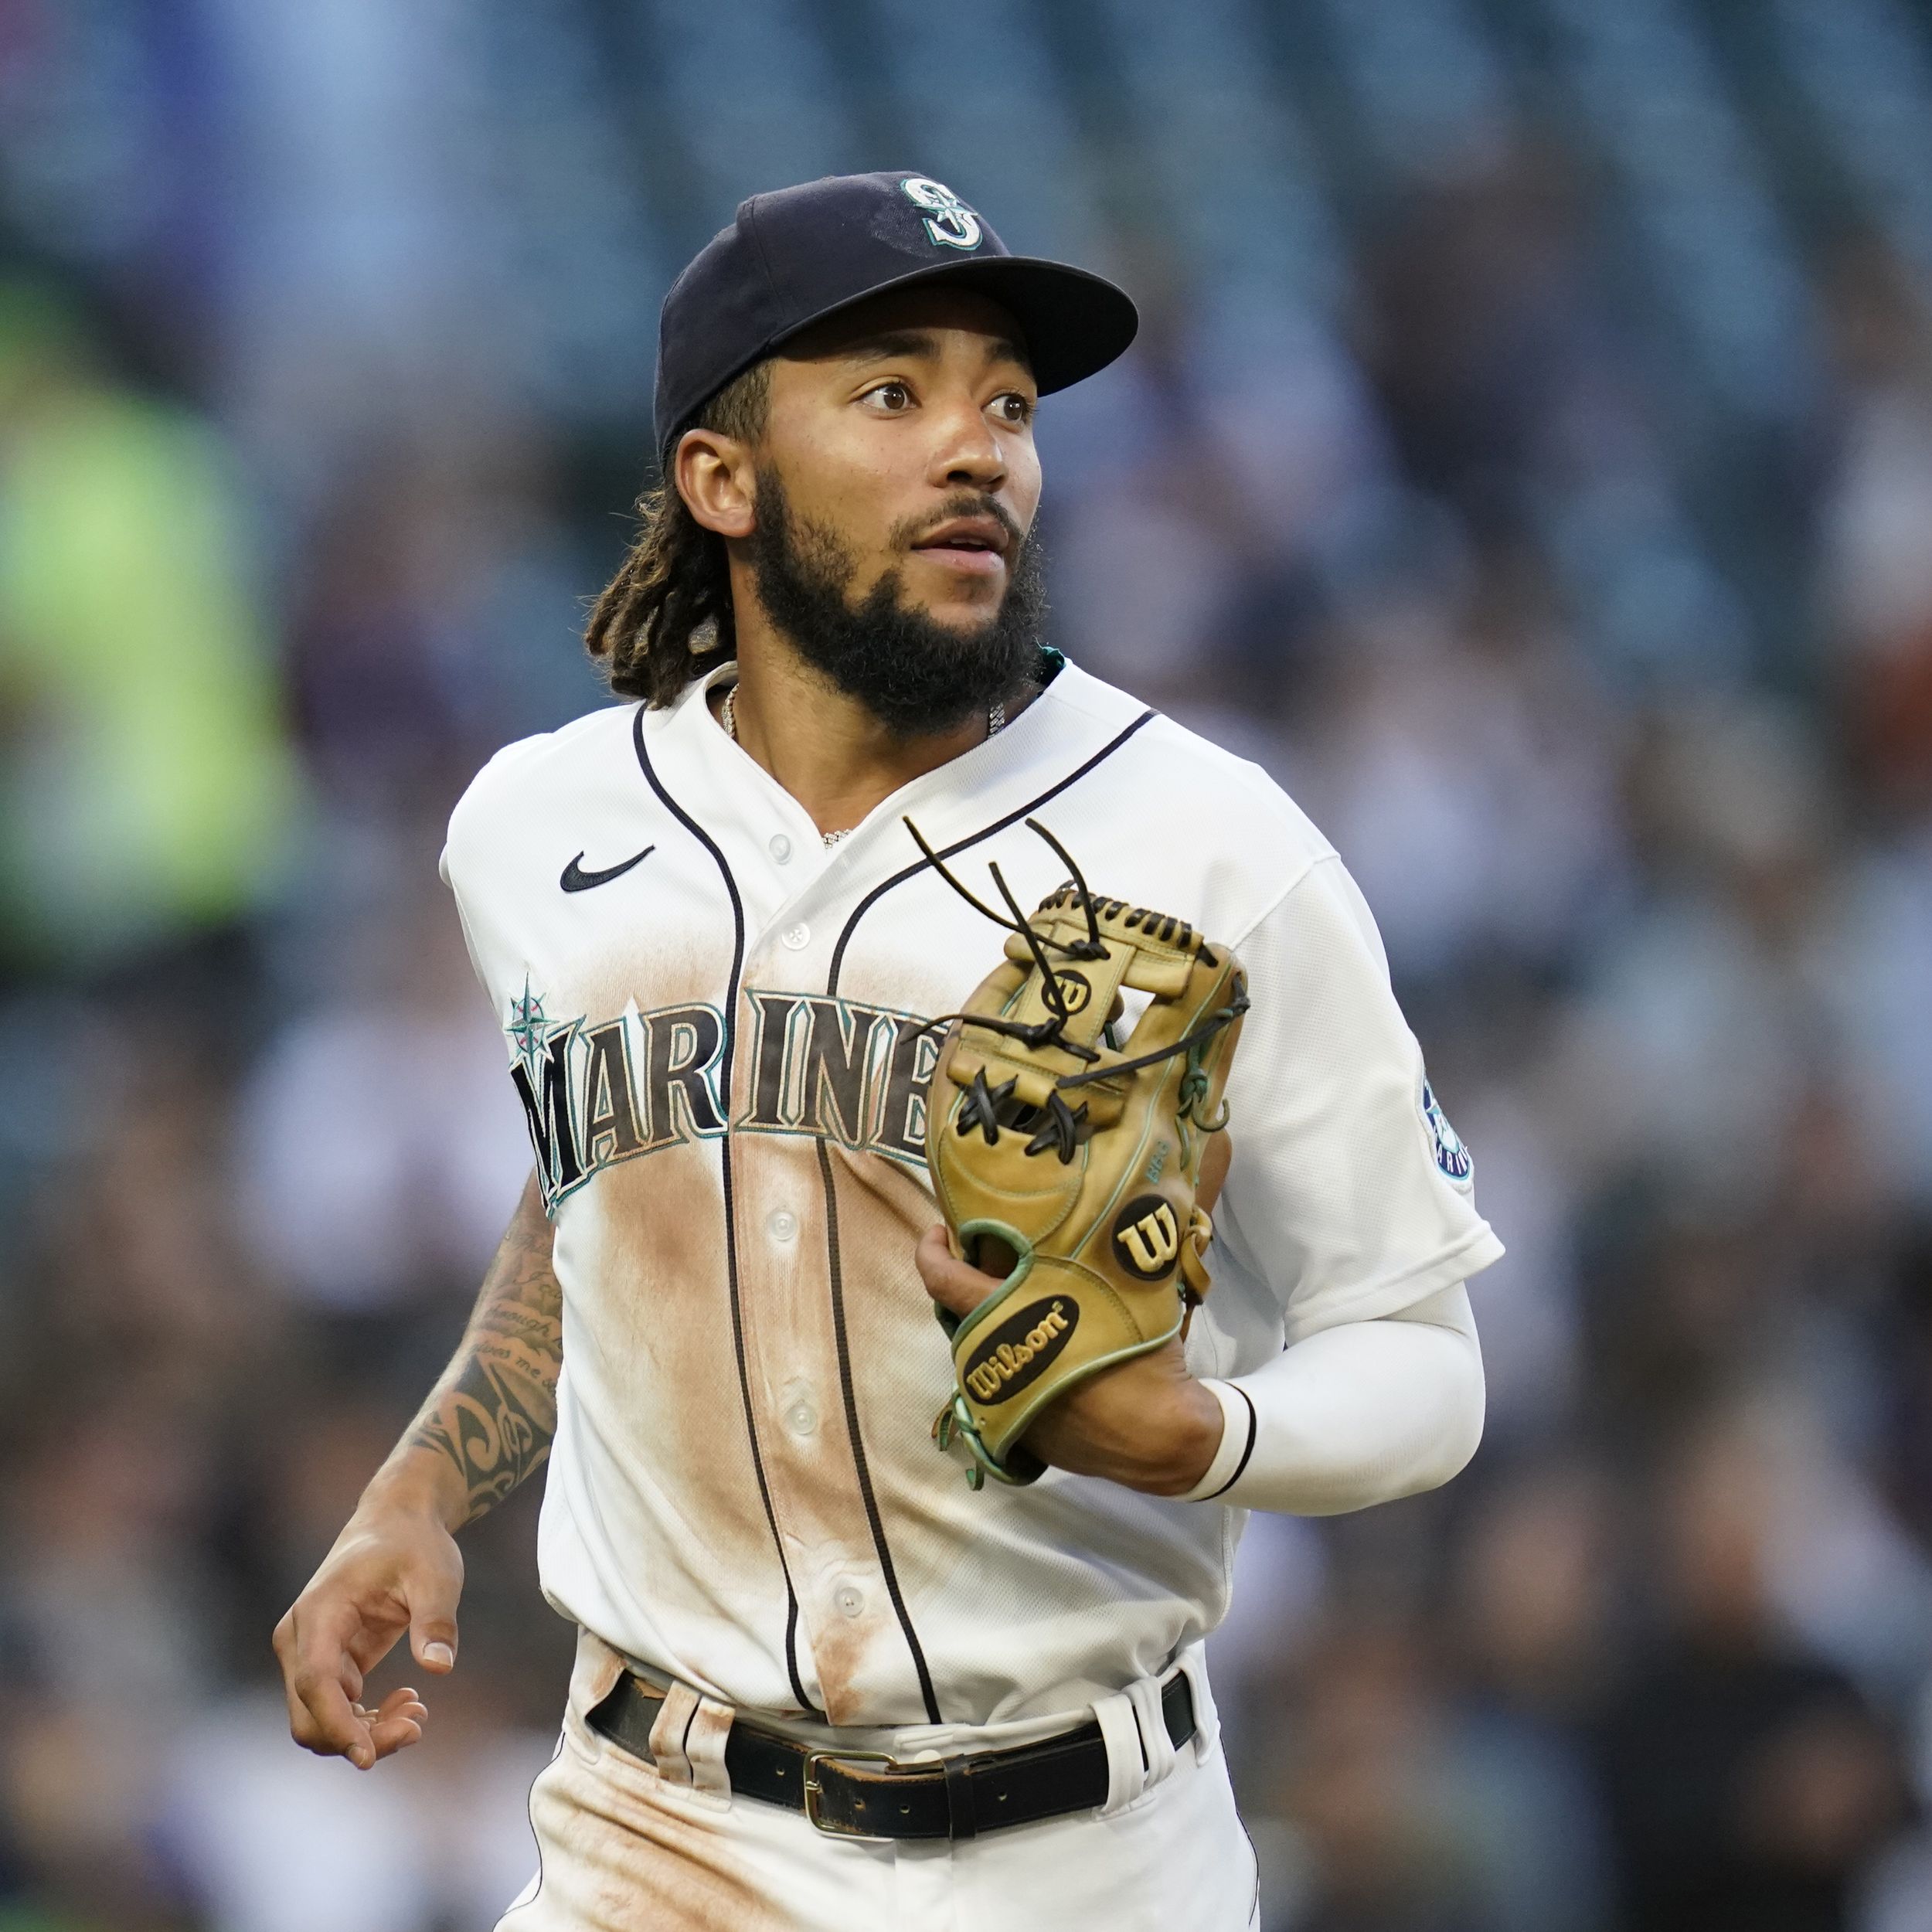 Even if J.P. Crawford isn't an All-Star, he's been the Mariners